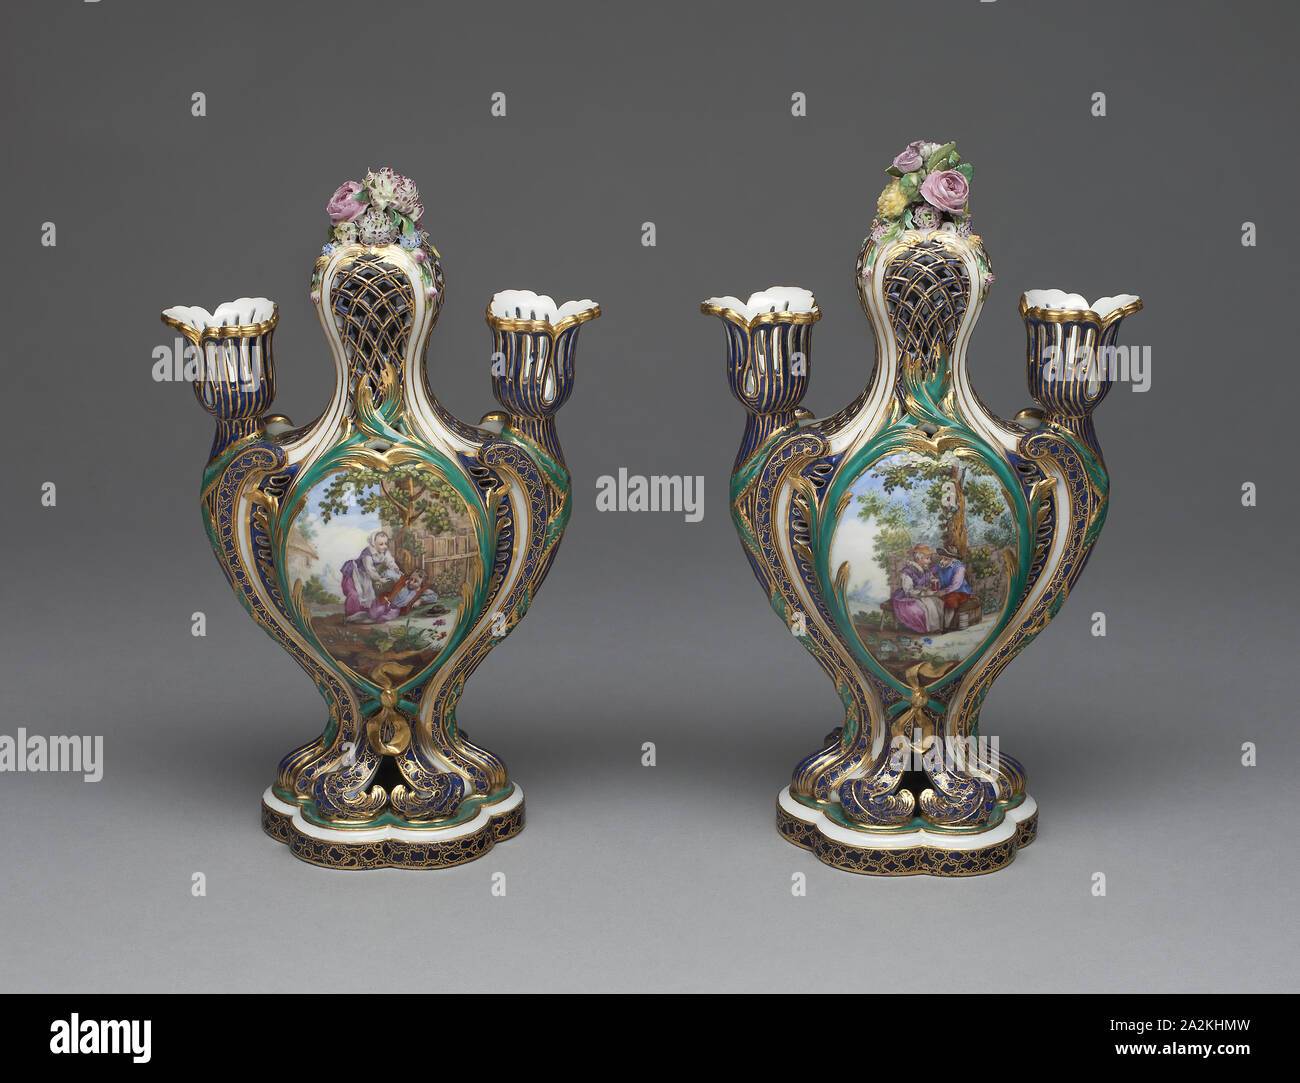 Pair of Vases (Pots Pourris à Bobèches), c. 1759, Sèvres Porcelain Manufactory, French, founded 1740, Designed by Jean-Claude Duplessis, (French, fl. 1745/48-1774, died 1783), Painted by André-Vincent Vieillard (attributed to), (French, 1717-90, active 1752-90), Sèvres, Soft-paste porcelain, polychrome enamels, and gilding, 1994.371.1: H. 24.1 cm (9 1/2 in Stock Photo